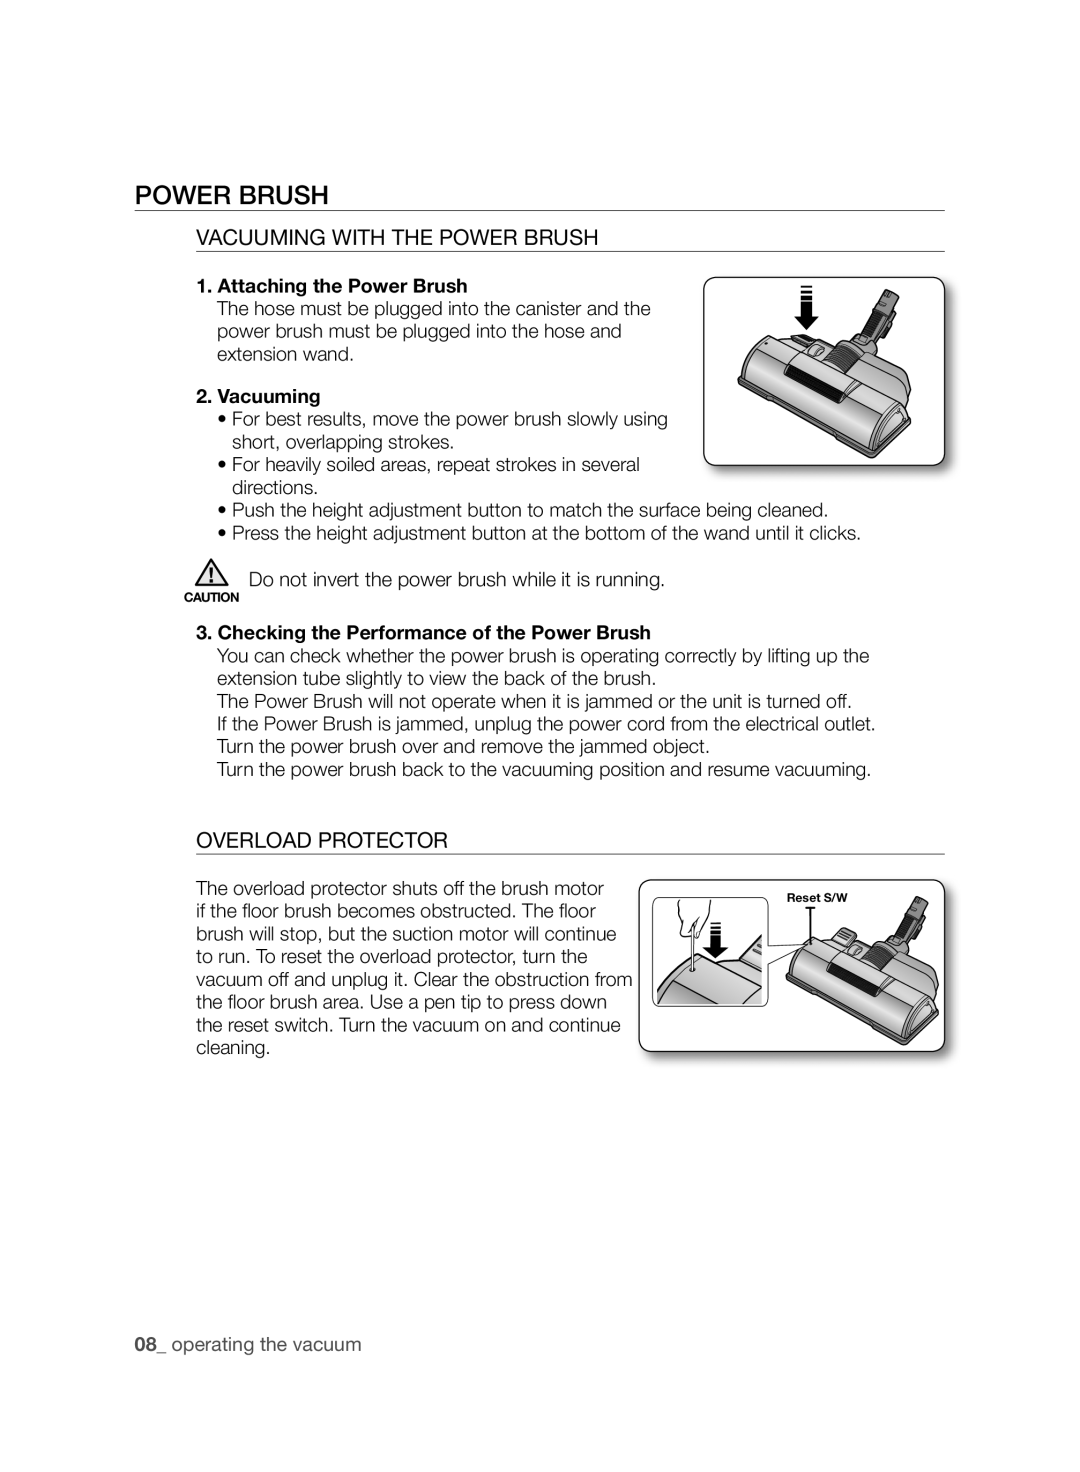 Samsung VCC96P0H1G user manual Vacuuming With The Power Brush, Overload Protector, Attaching the Power Brush 